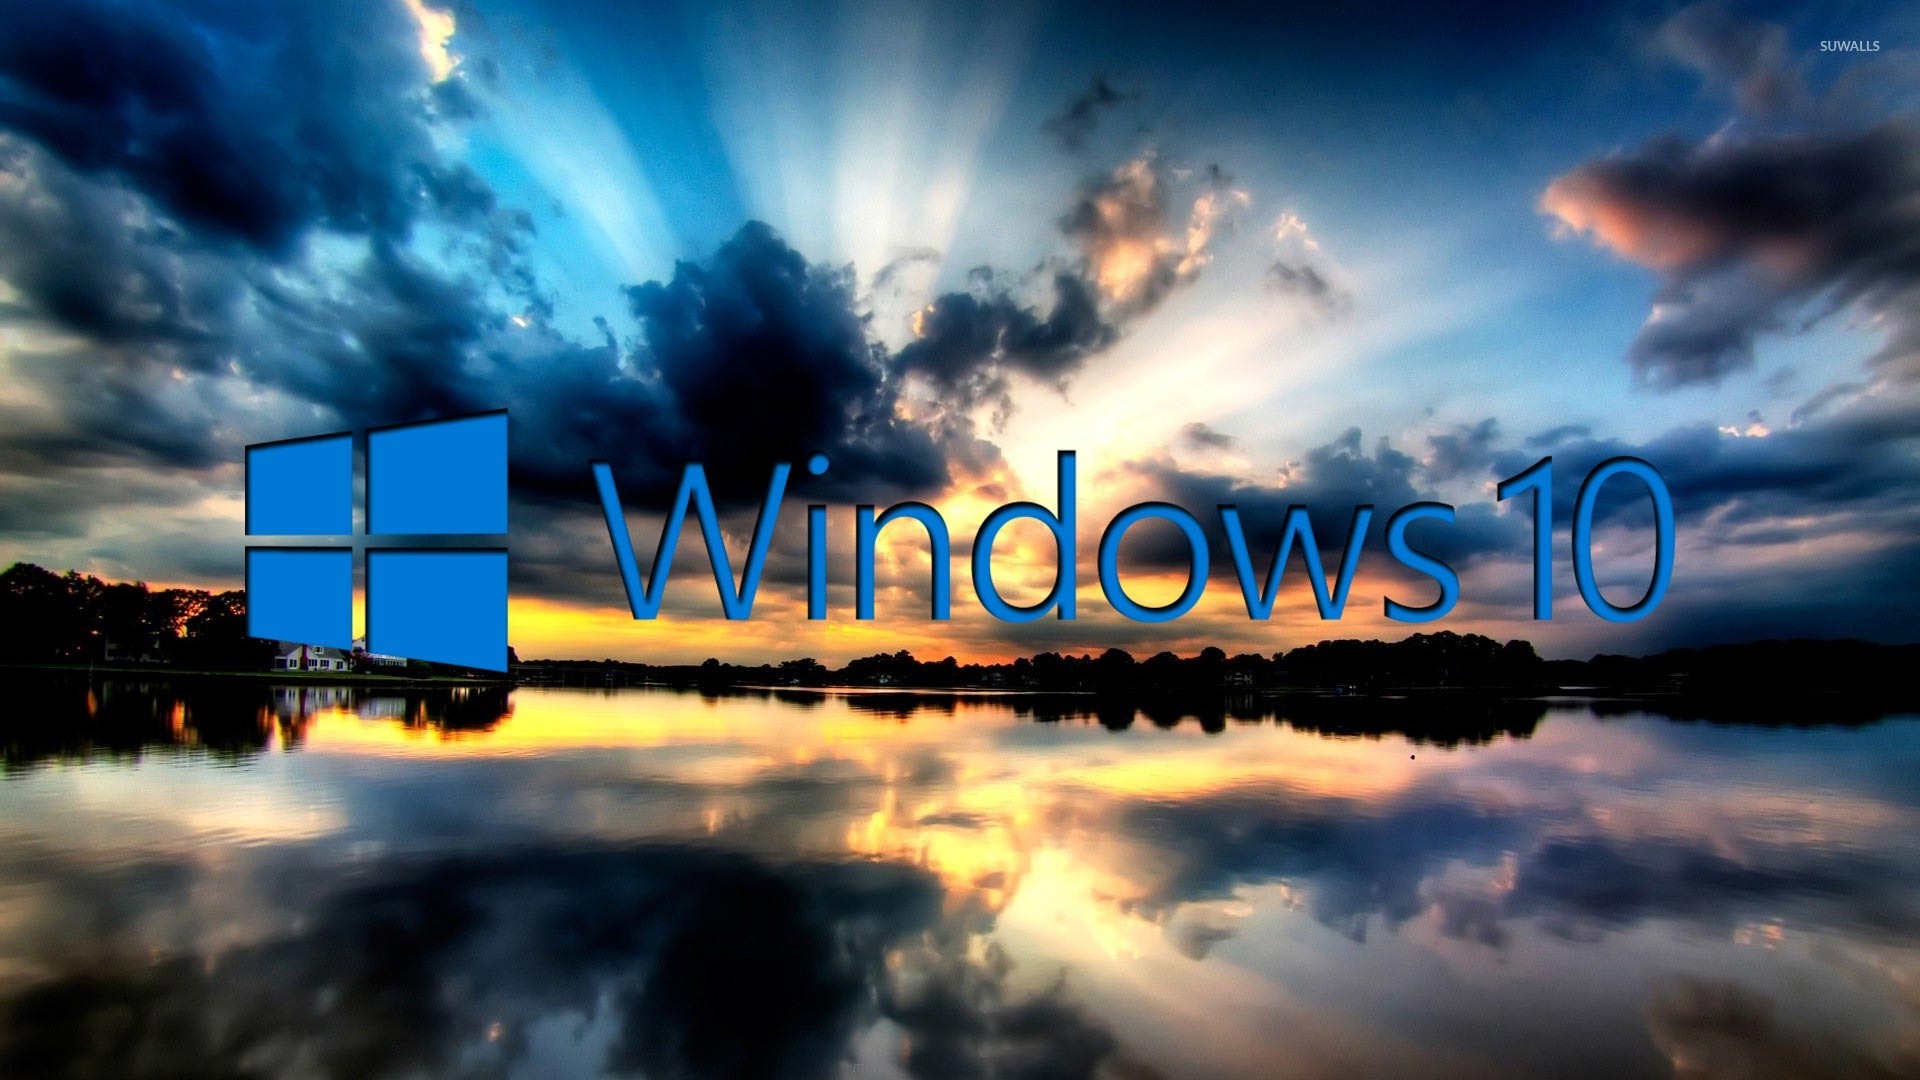 Windows 10 On The Reflected Clouds 3 Wallpaper Computer Wallpapers 480